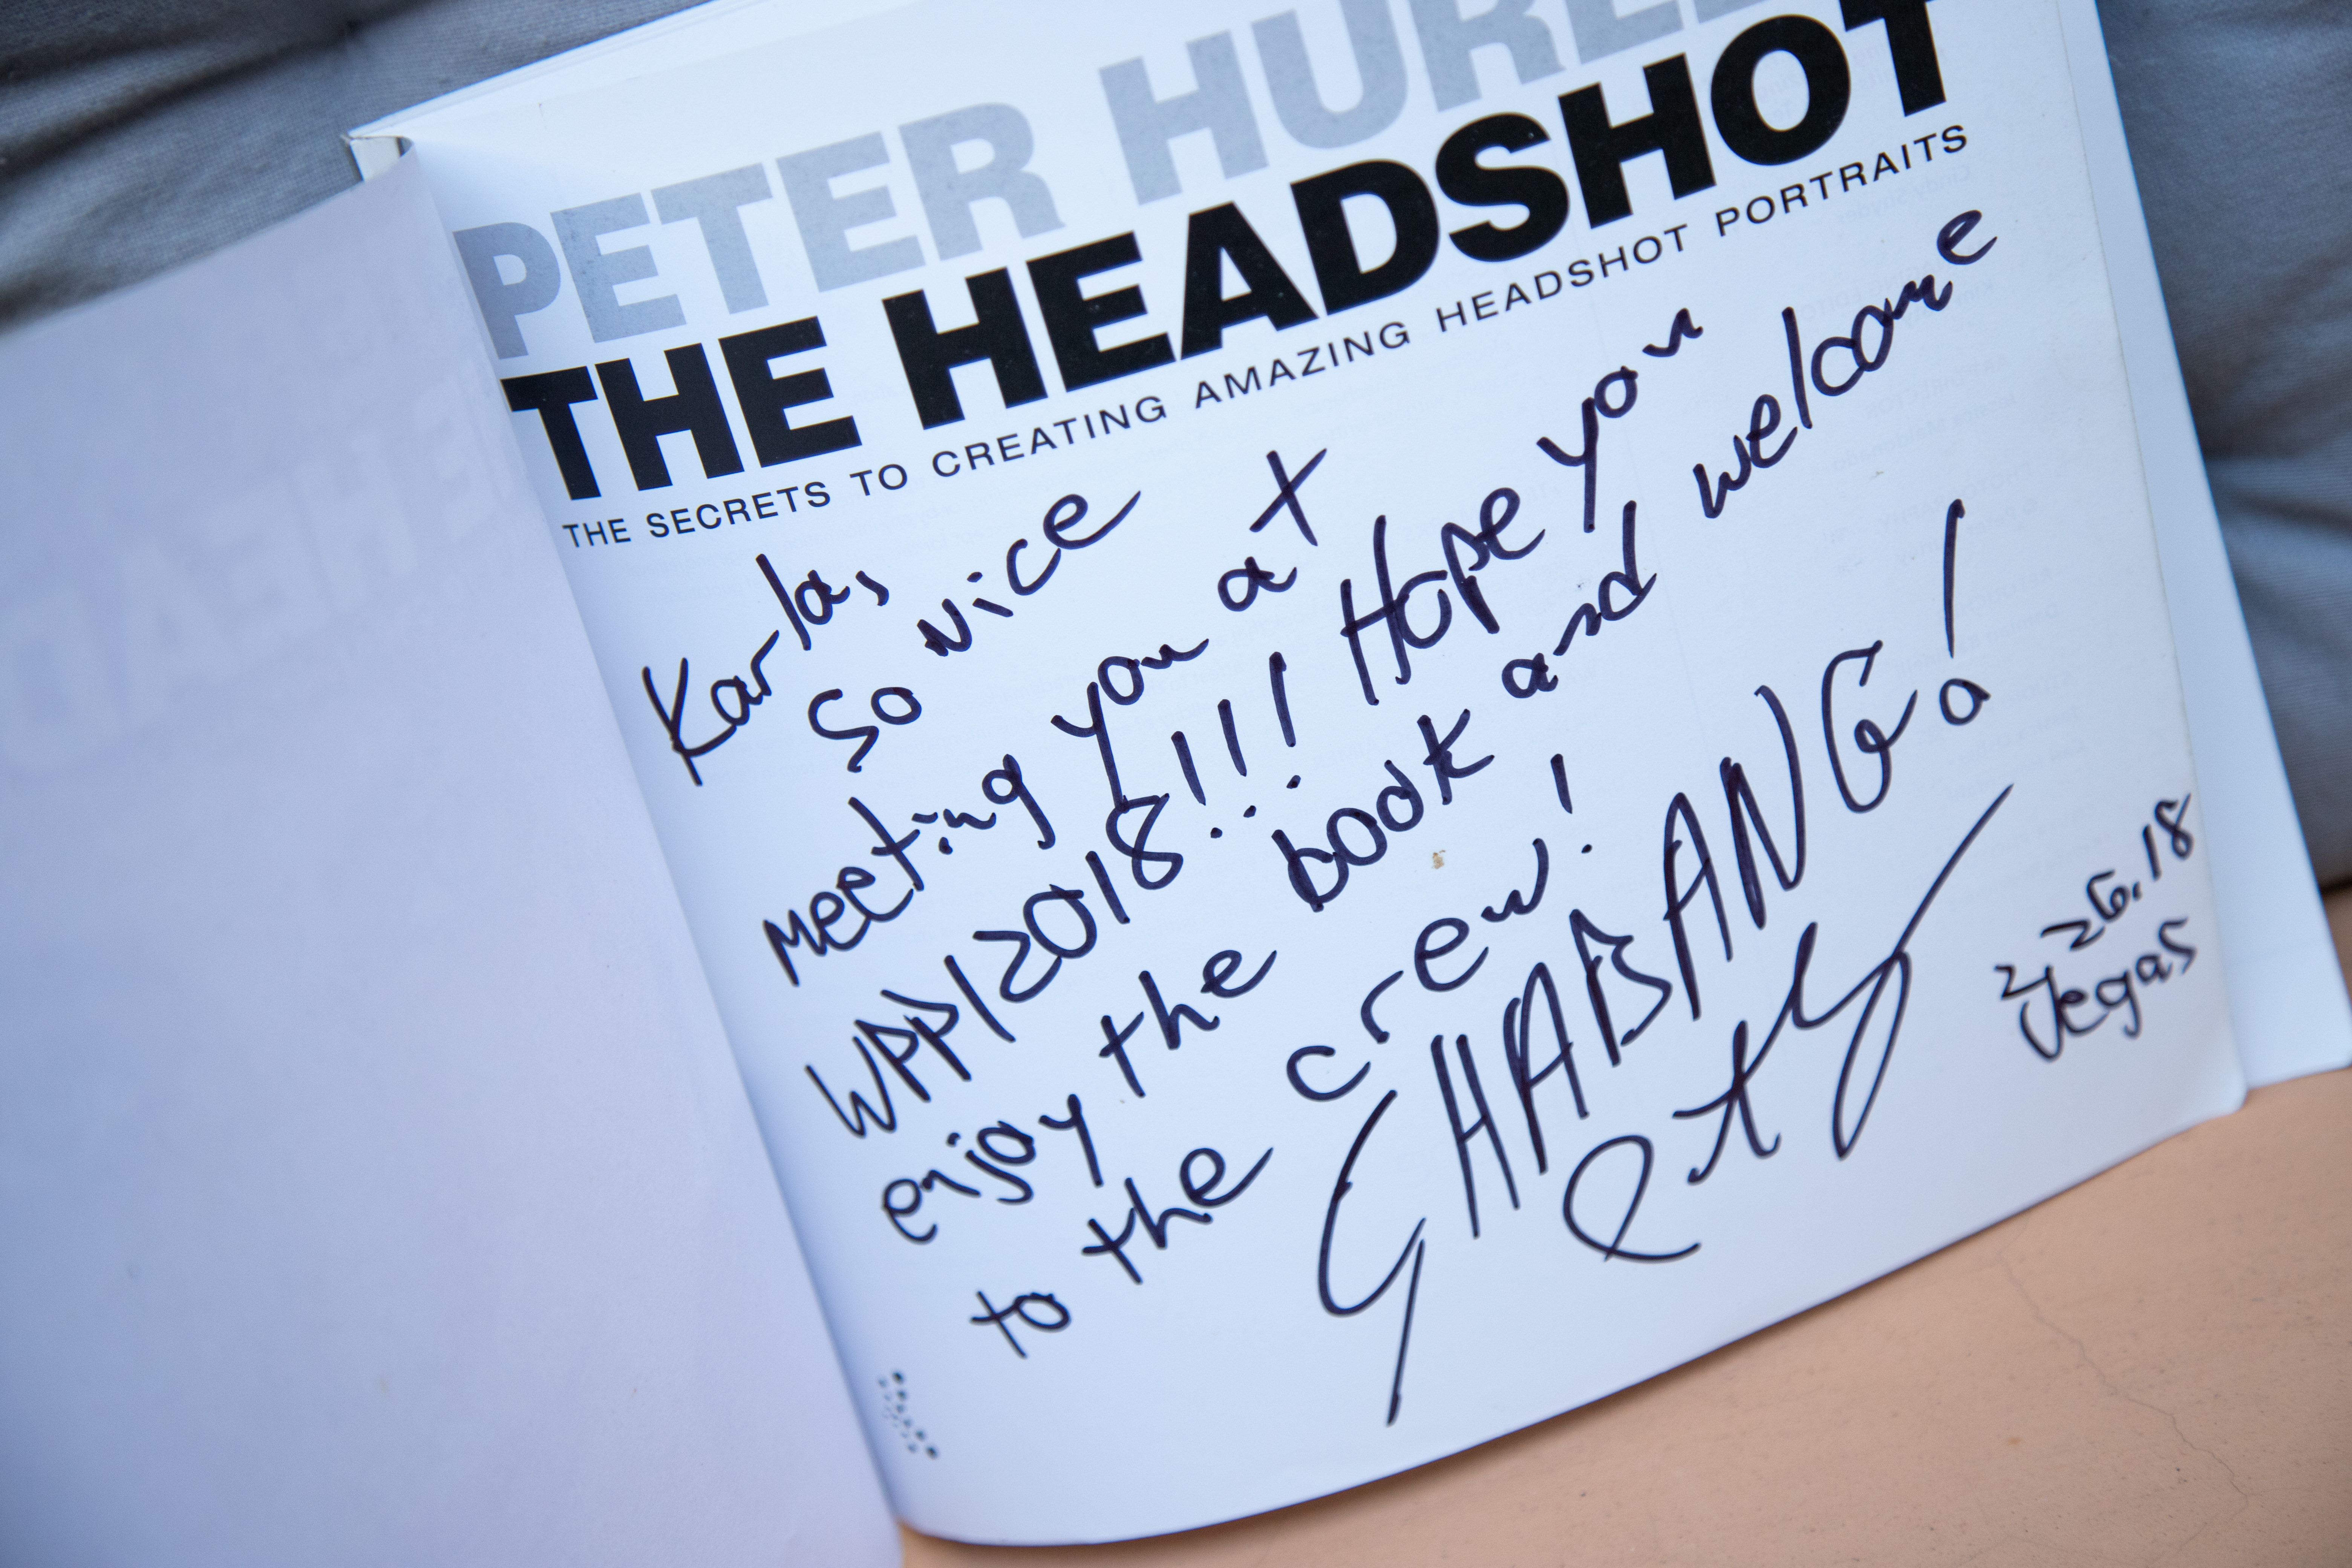 The Headshots, book signed by Peter Hurley